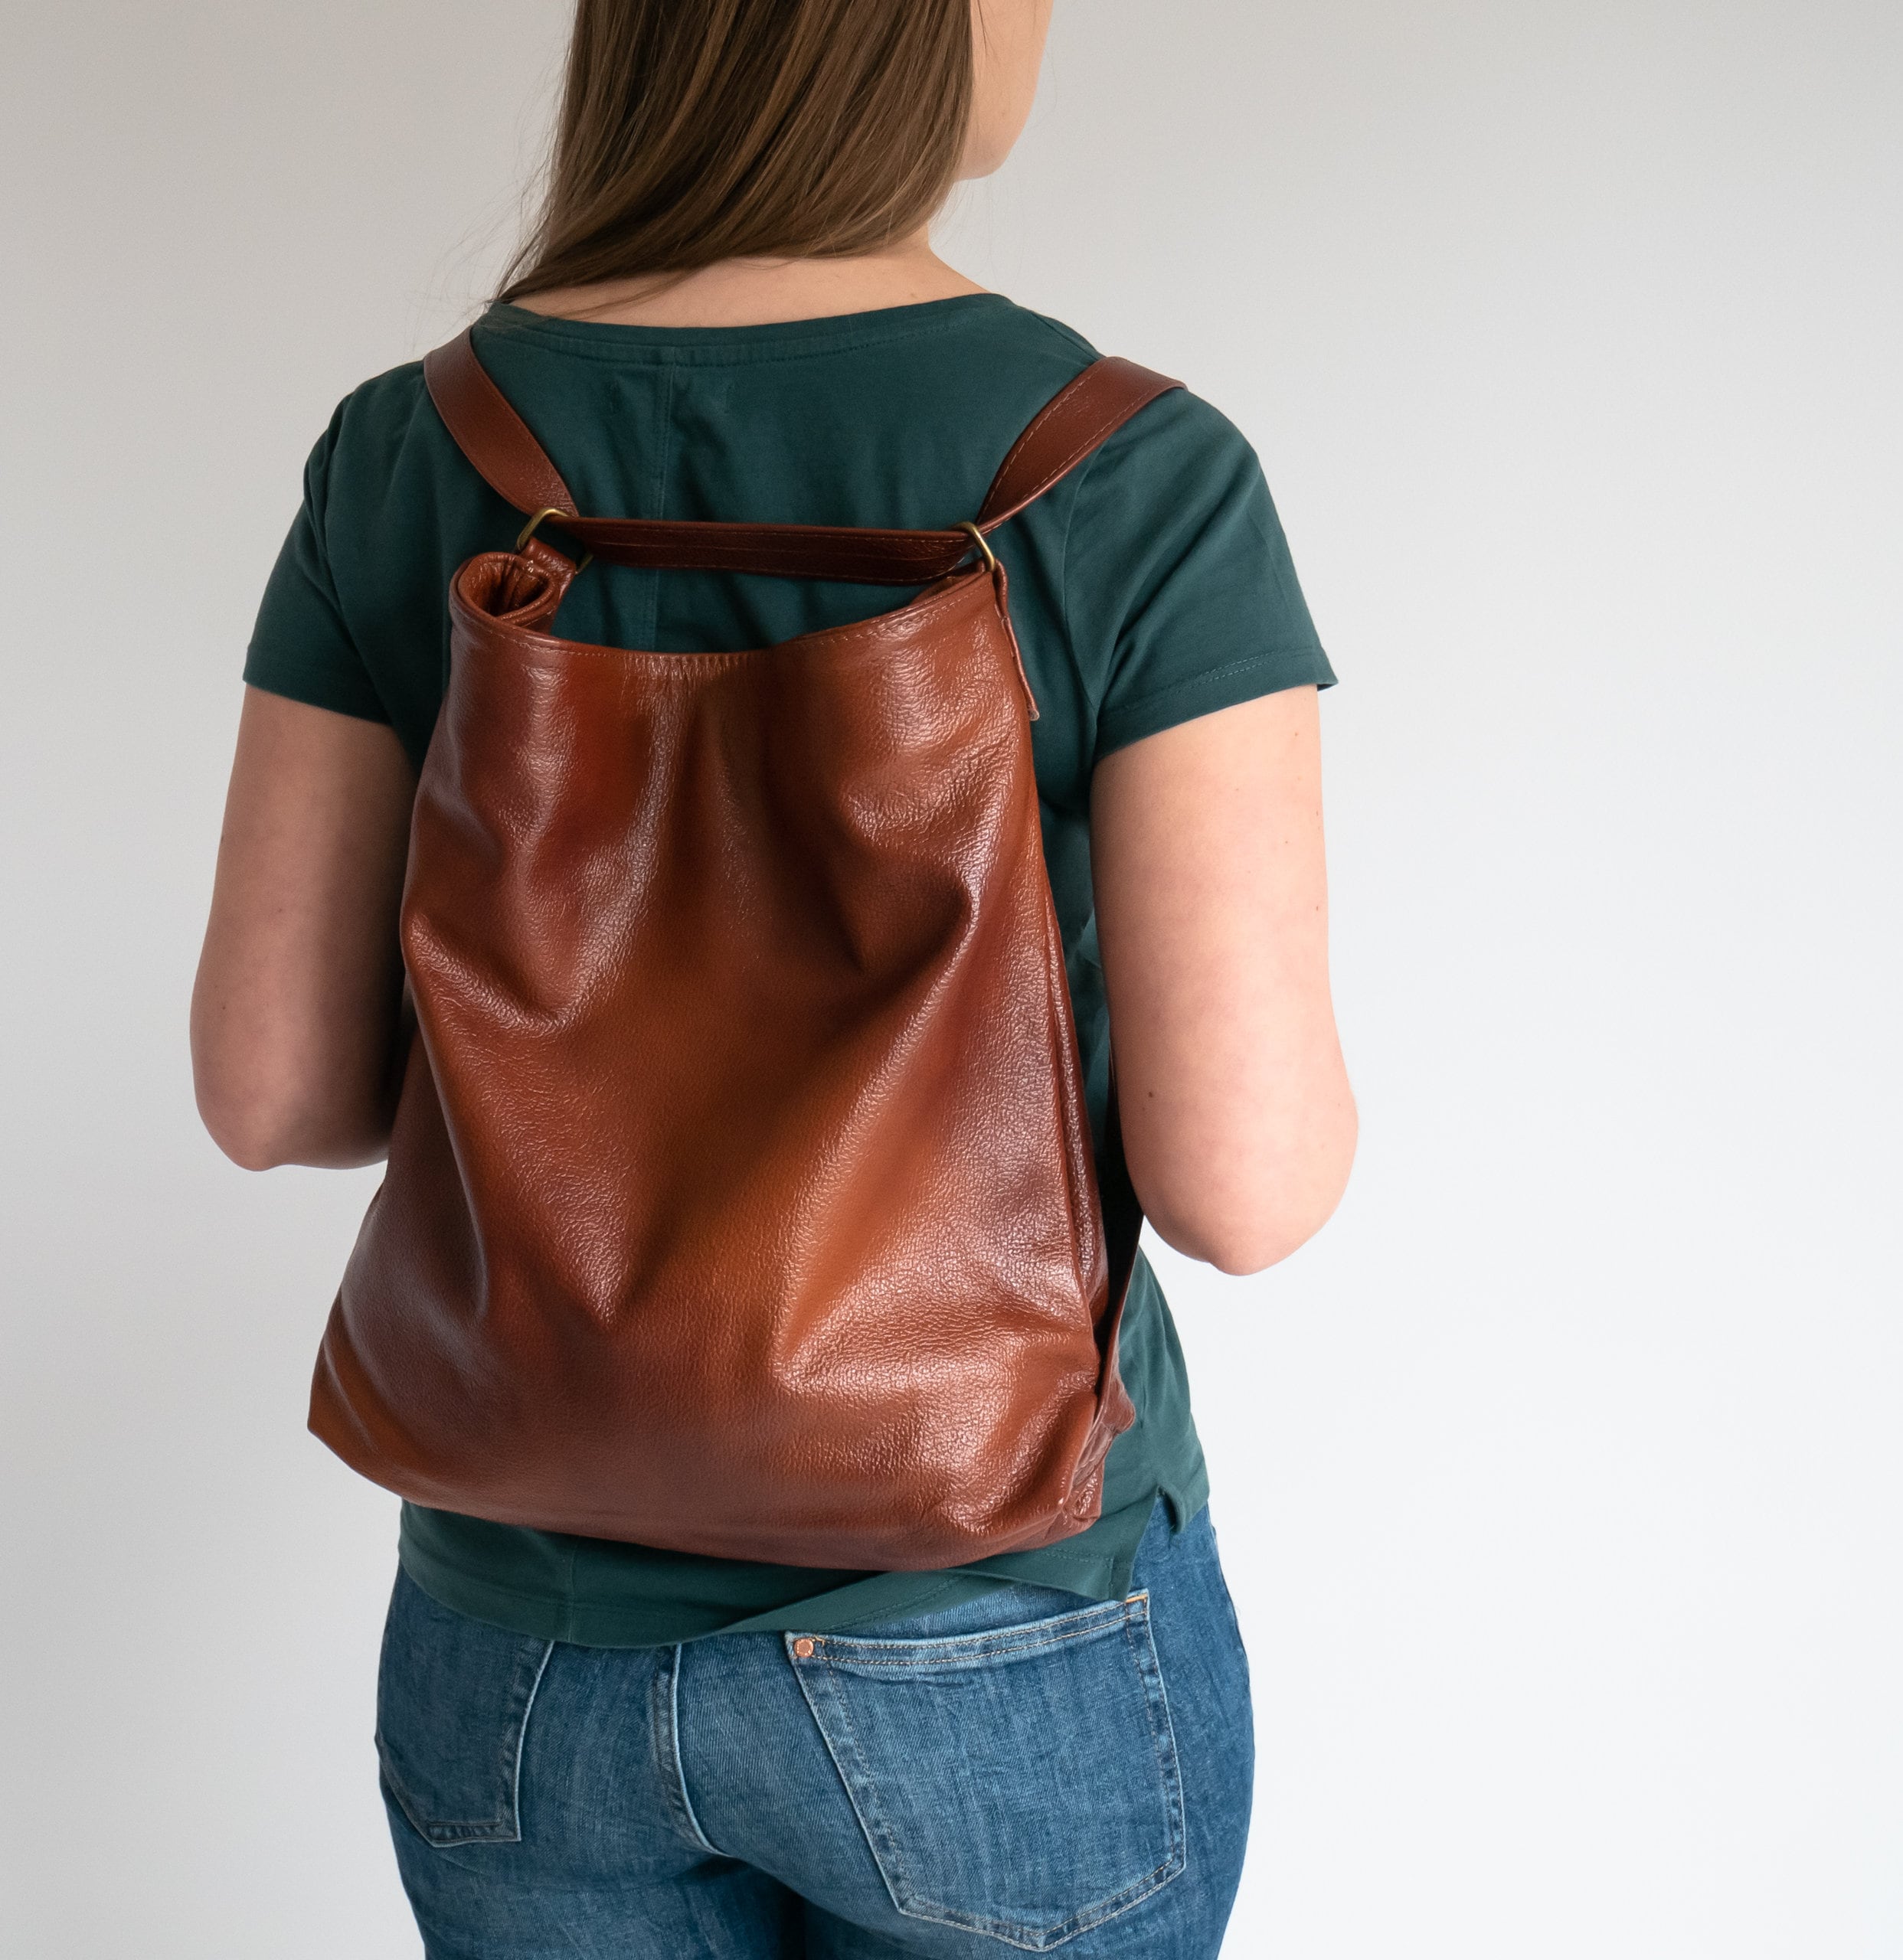 Buy BROWN LEATHER BACKPACK Purse Backpack Leather Shoulder Bag Cognac  Rucksack Leather Purse Bag Cognac Women's Handbag Leather Bag Online in  India - Etsy